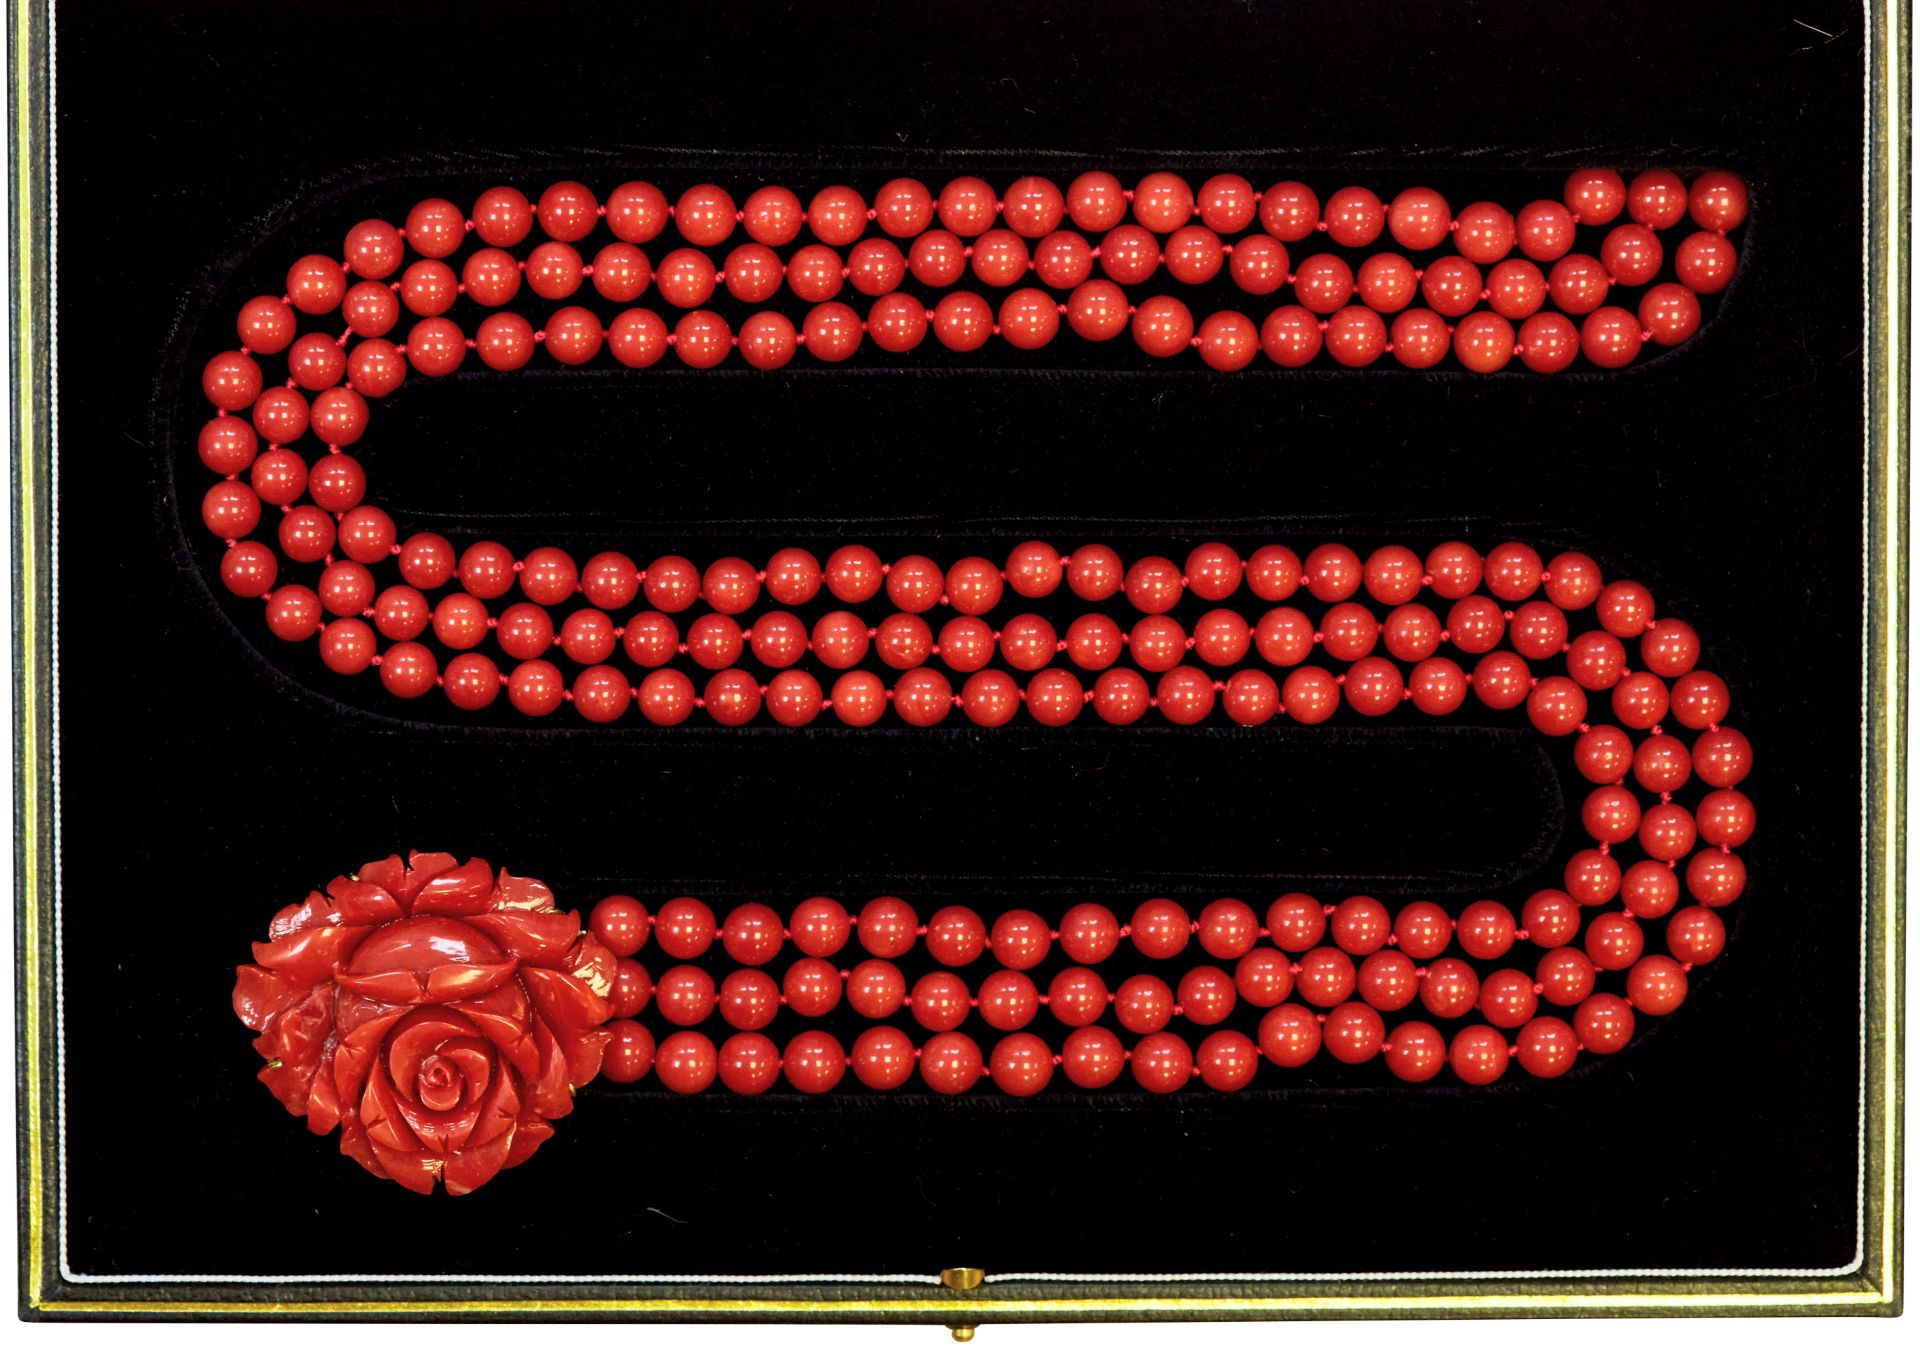 VAN CLEEF & ARPELS, IMPORTANT CARVED CORAL AND CORAL NECKLACE